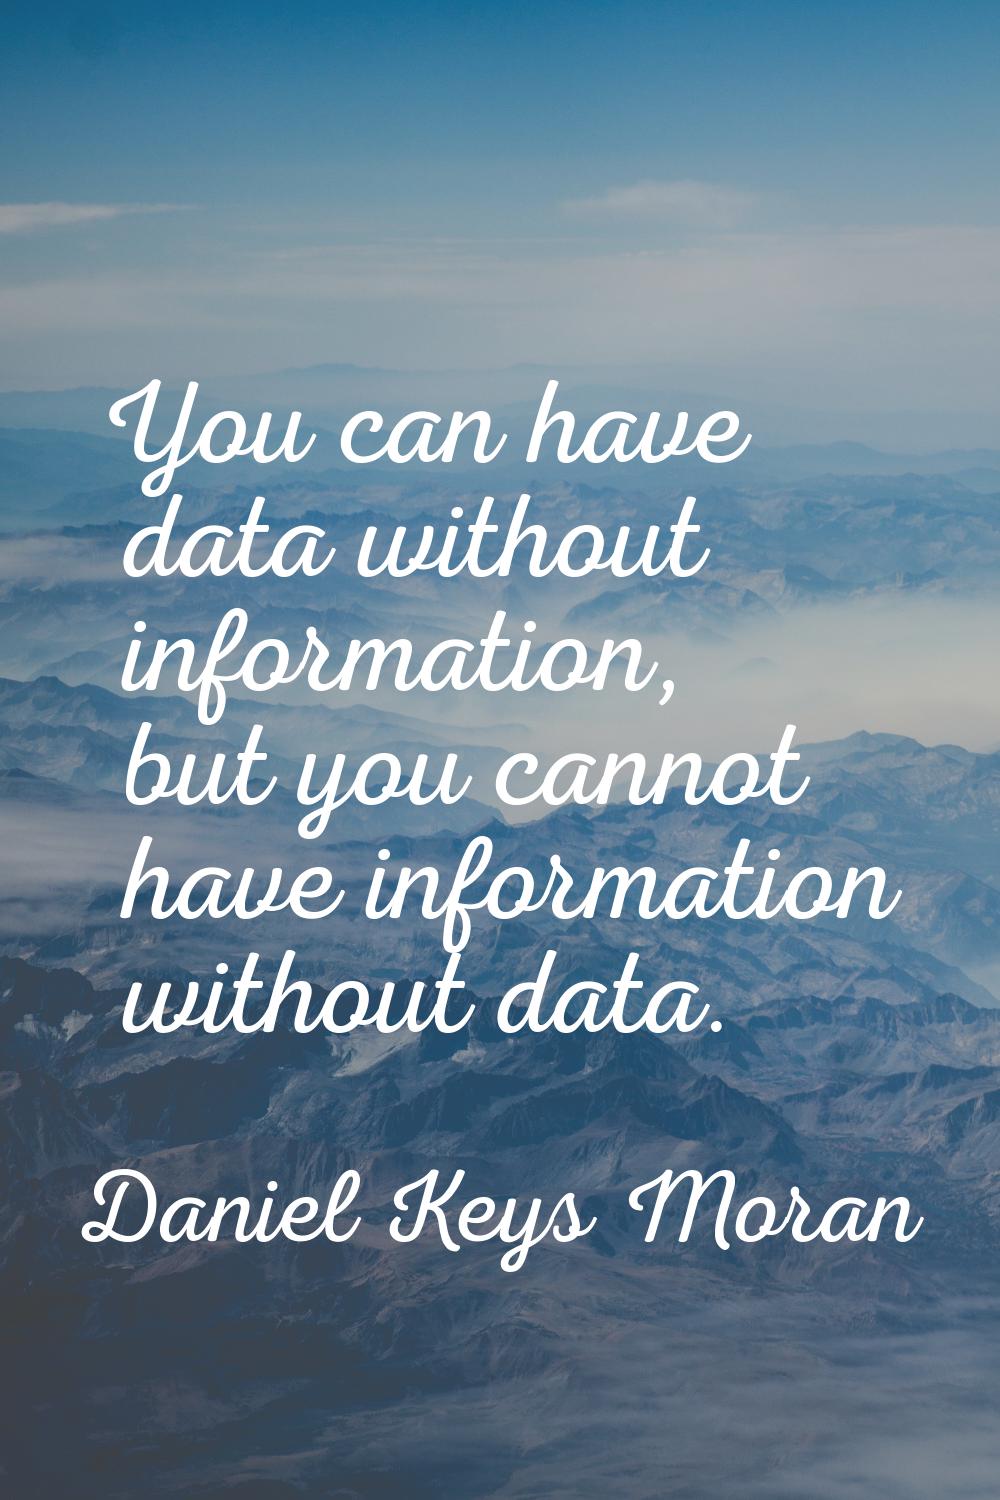 You can have data without information, but you cannot have information without data.